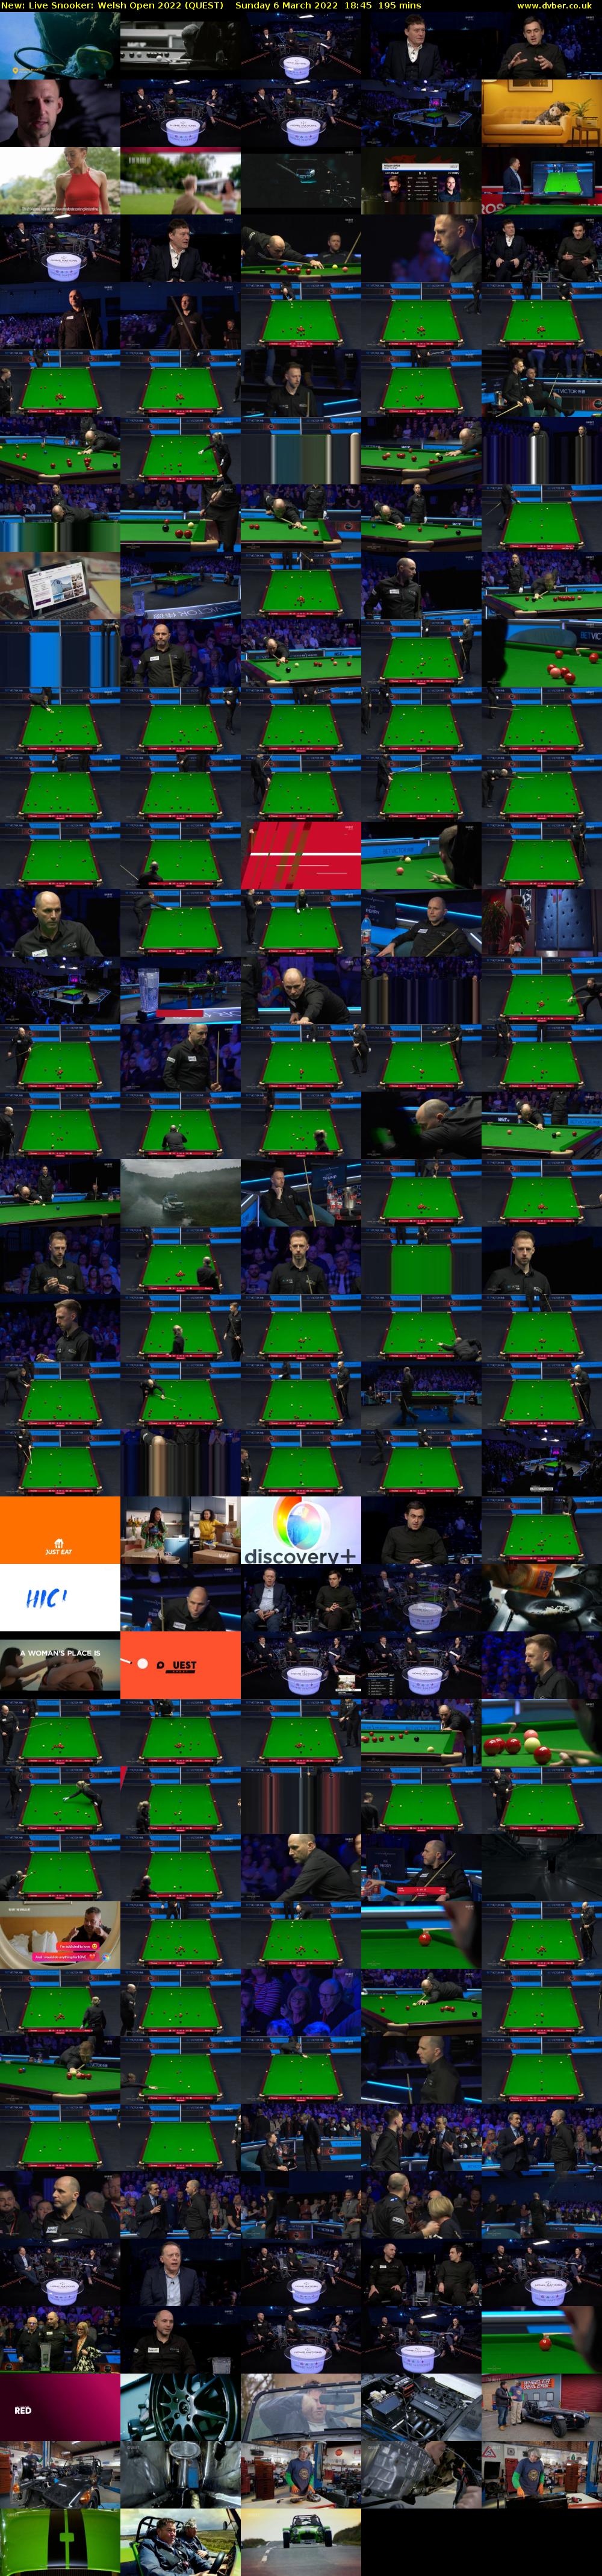 Live Snooker: Welsh Open 2022 (QUEST) Sunday 6 March 2022 18:45 - 22:00